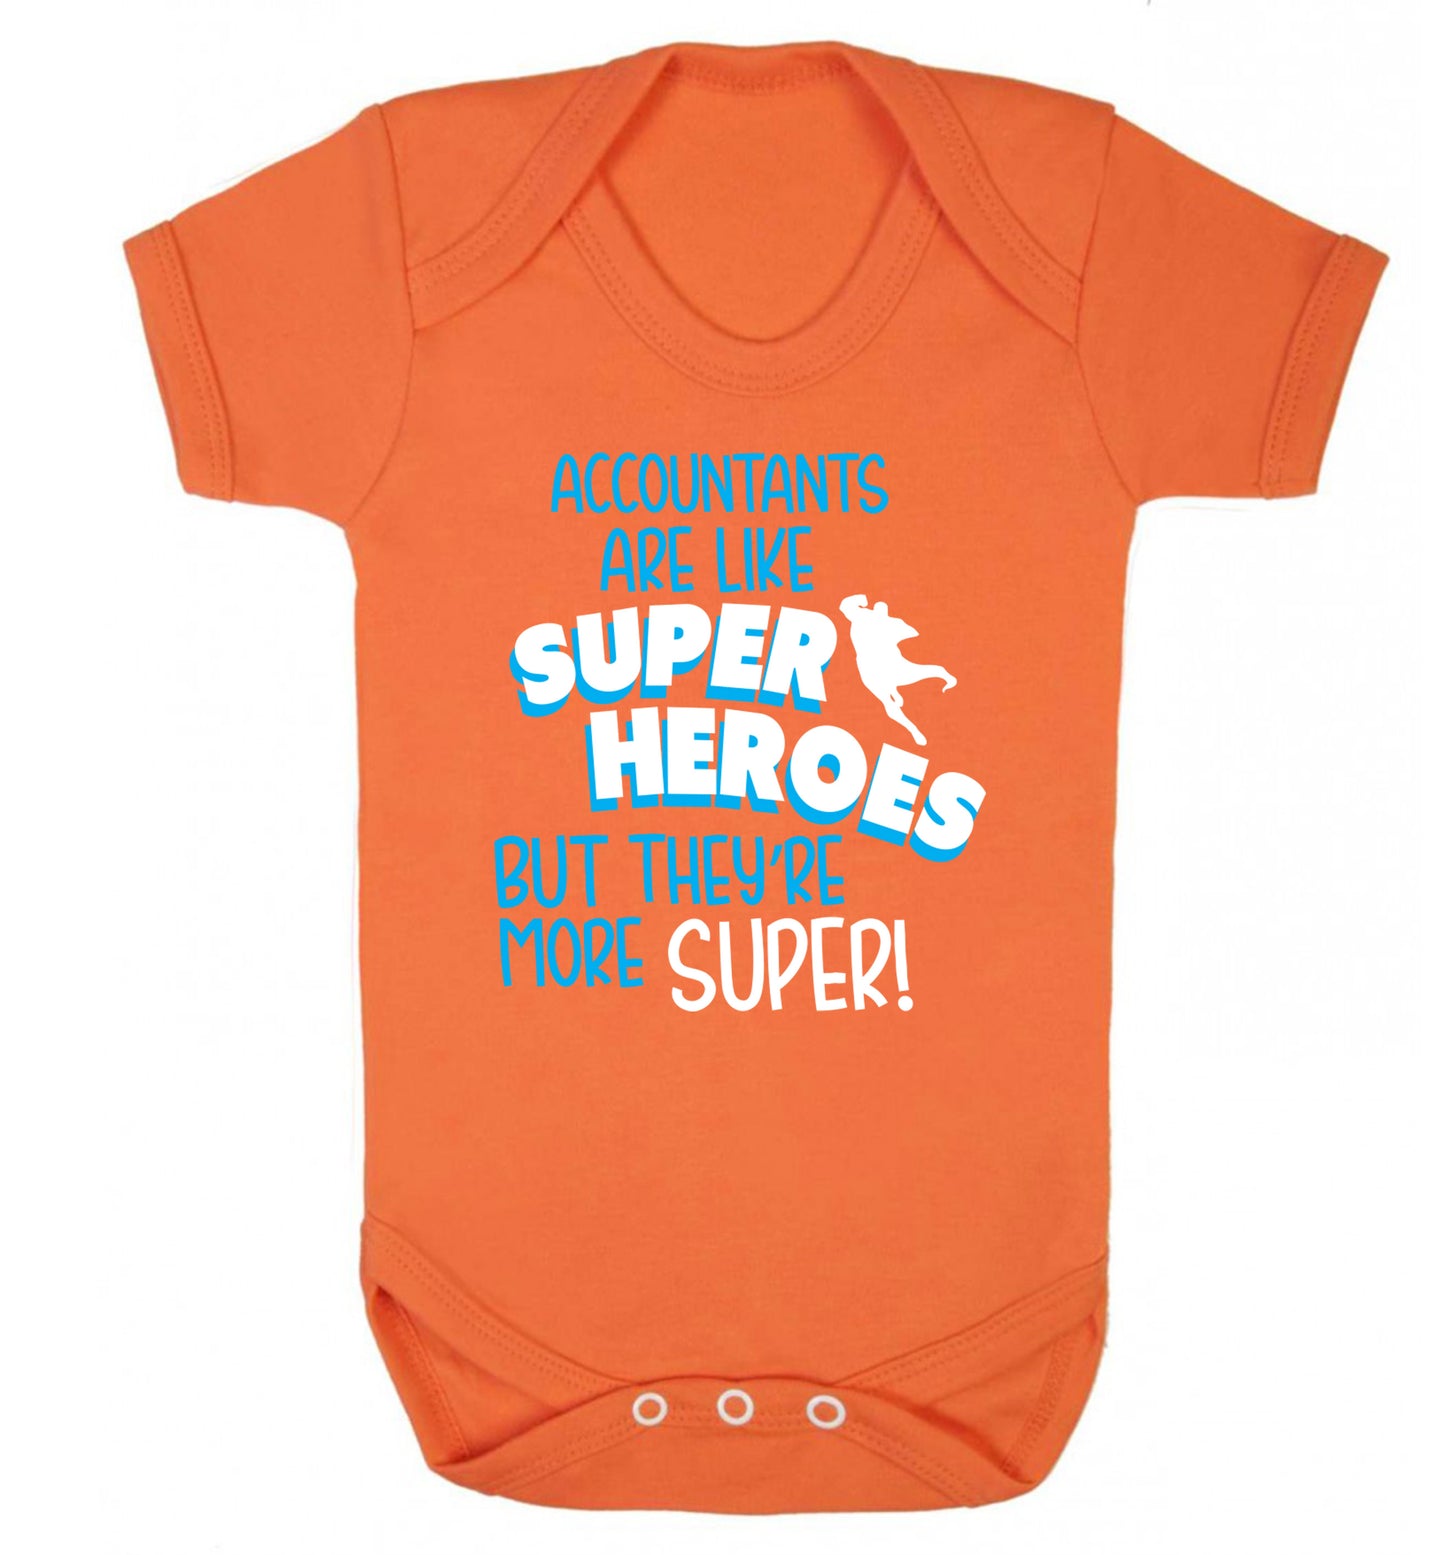 Accountants are like superheroes but they're more super Baby Vest orange 18-24 months